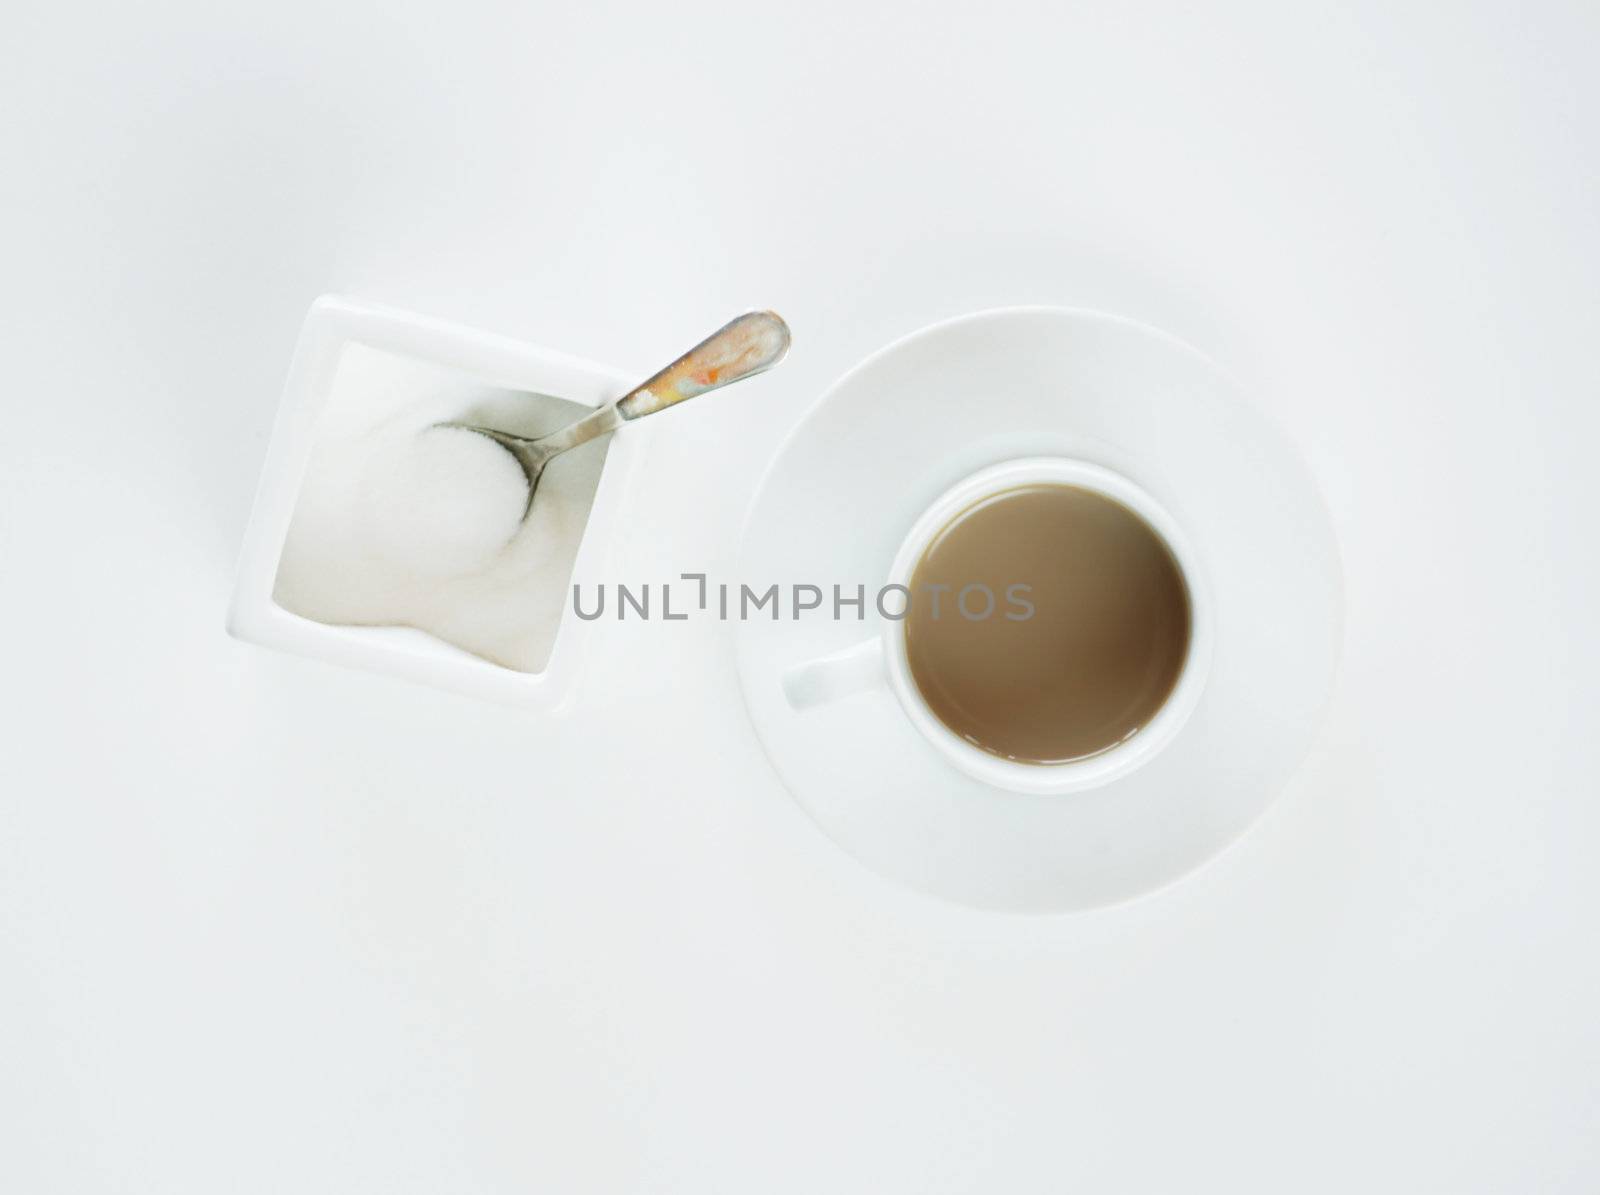 Coffe in espresso cup and sugar container on a white background.